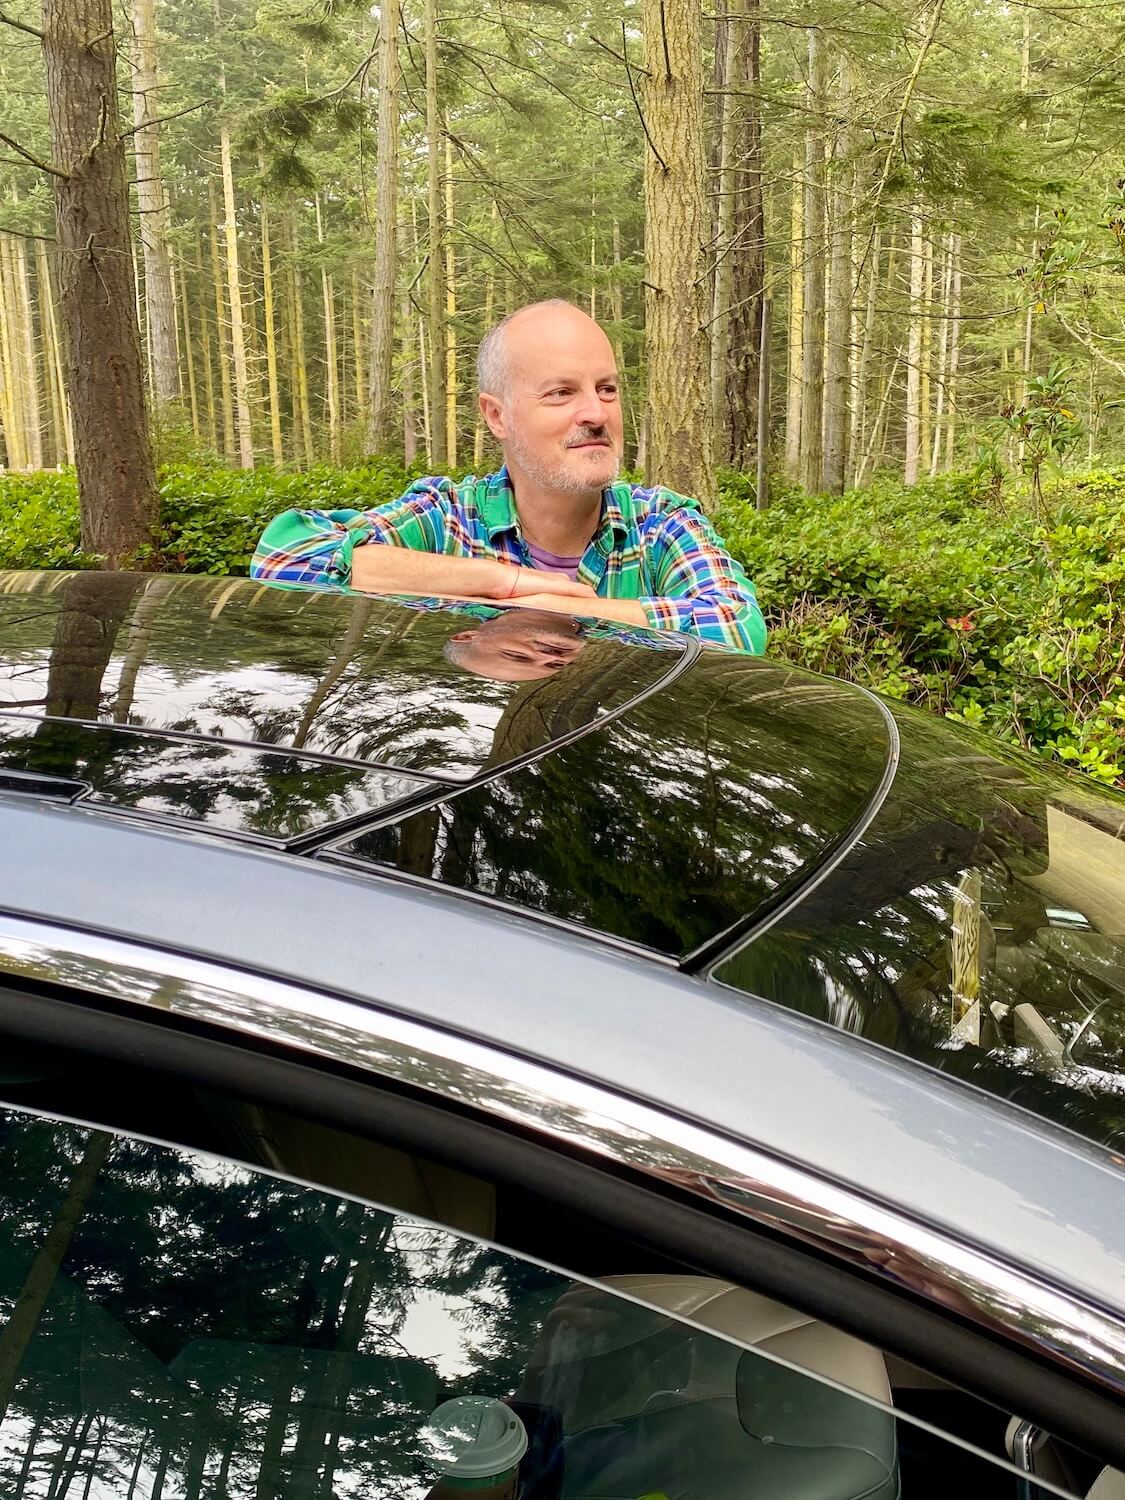 Selfie of Matthew Kessi standing outside a Tesla S series in the middle of a woods scene. The trees in the background are fir with variegated bark and he is wearing a green plaid shirt while resting his arms on the shining metallic blue sedan.